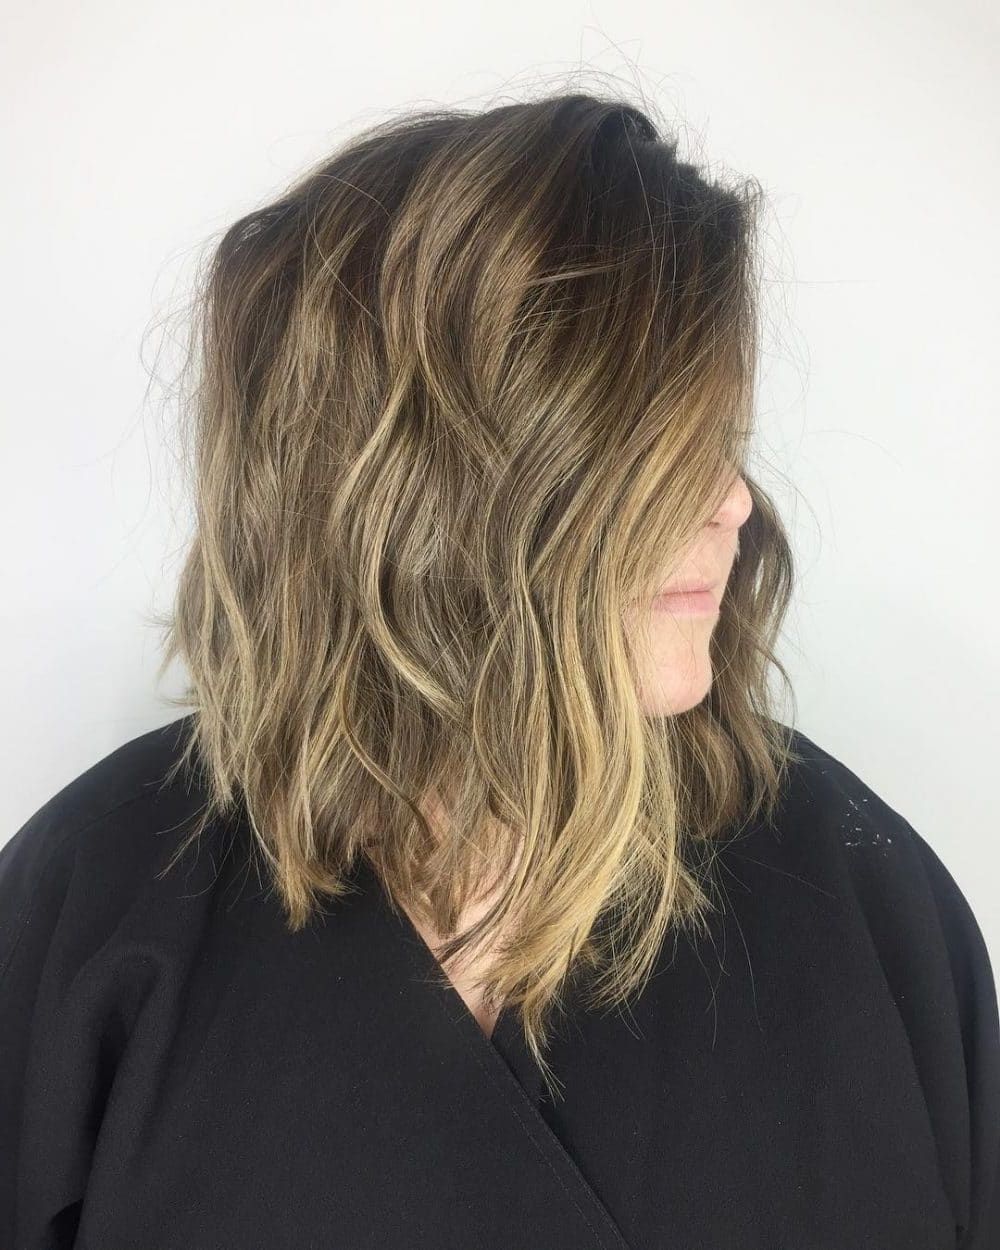 33 Hottest A Line Bob Haircuts You'll Want To Try In 2020 With Regard To Well Liked A Line Bob Hairstyles (View 16 of 20)